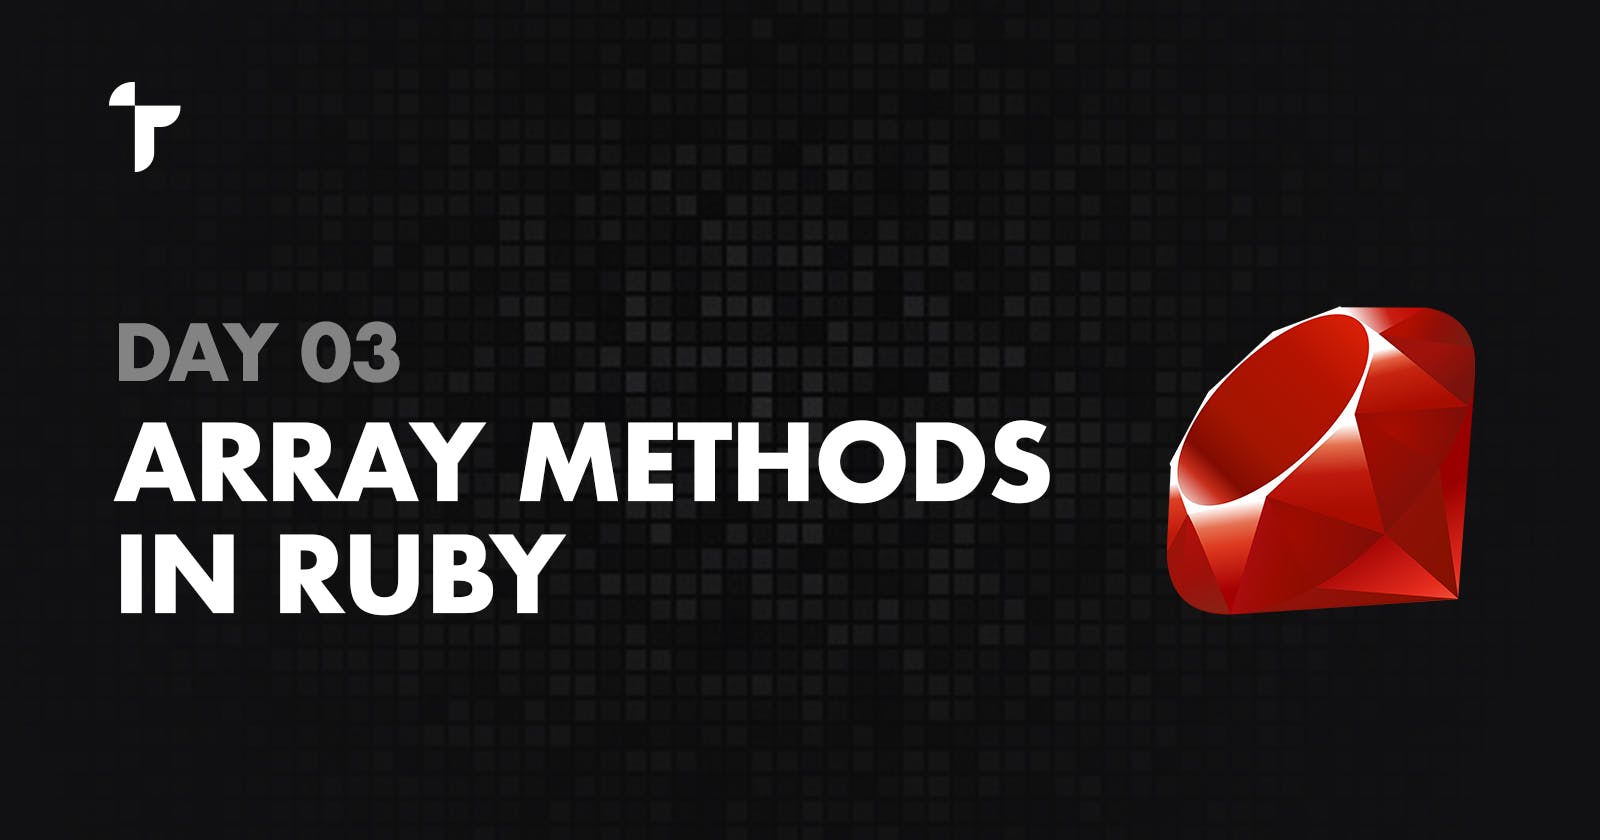 Day 03 - Array Methods in Ruby